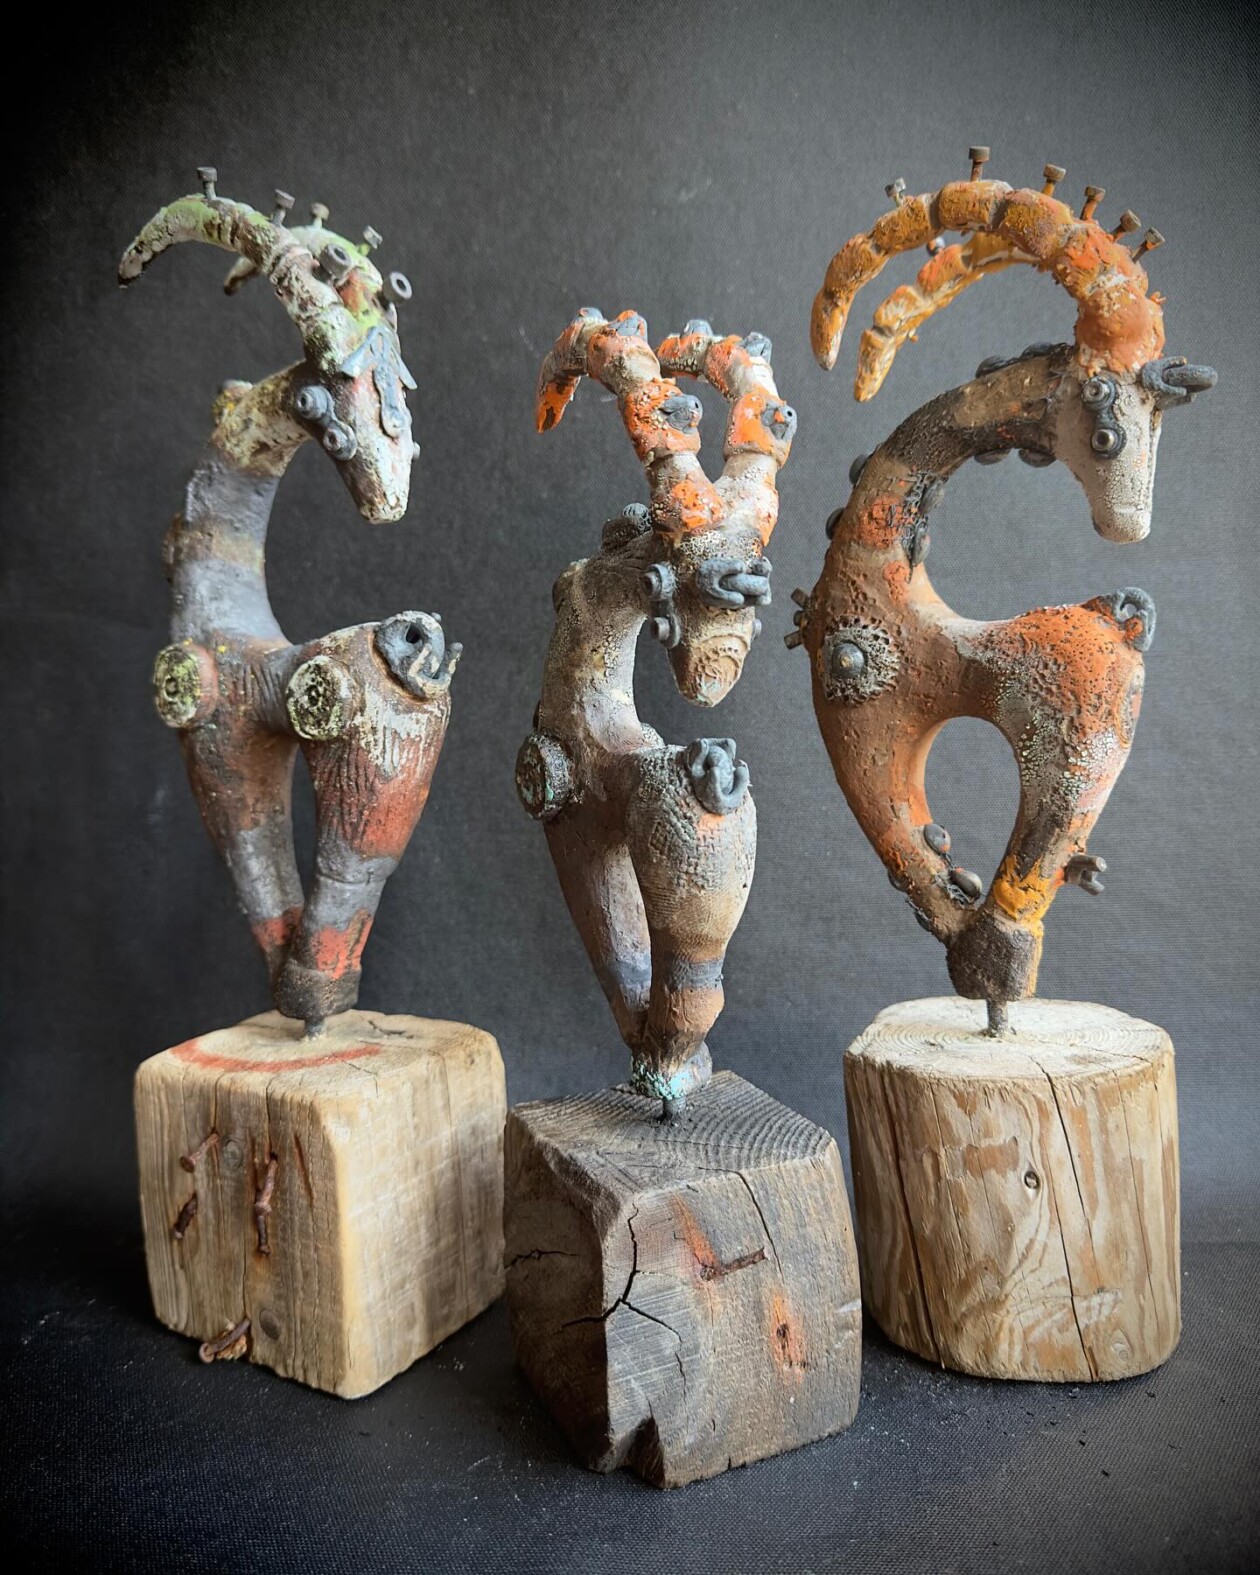 Fascinating Animal Ceramic Sculptures That Look Like Ancient Artifacts By Gul Sahin (1)